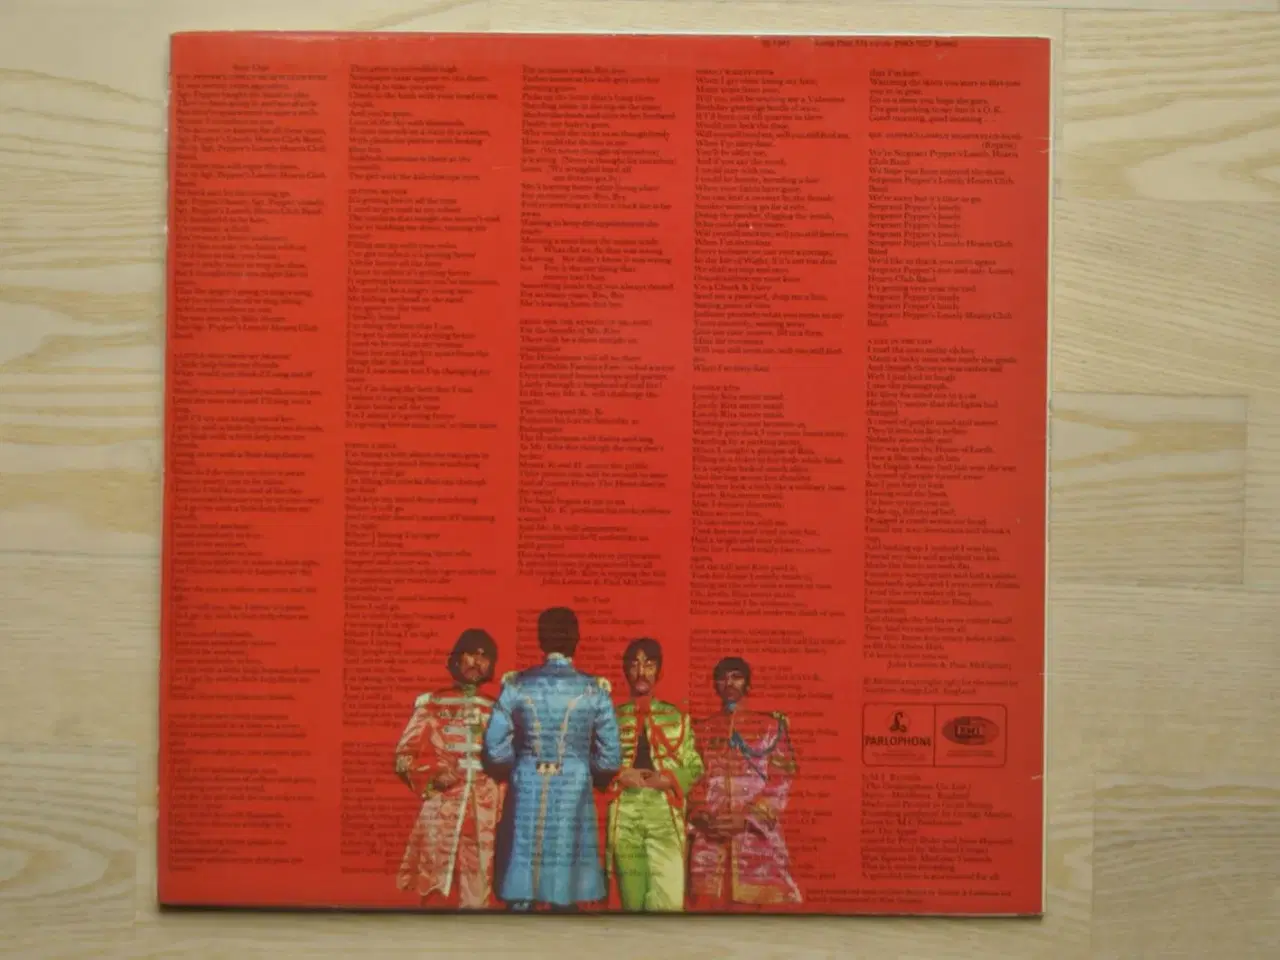 Billede 5 - Sgt. Pepper Lonely Hearts Club Band